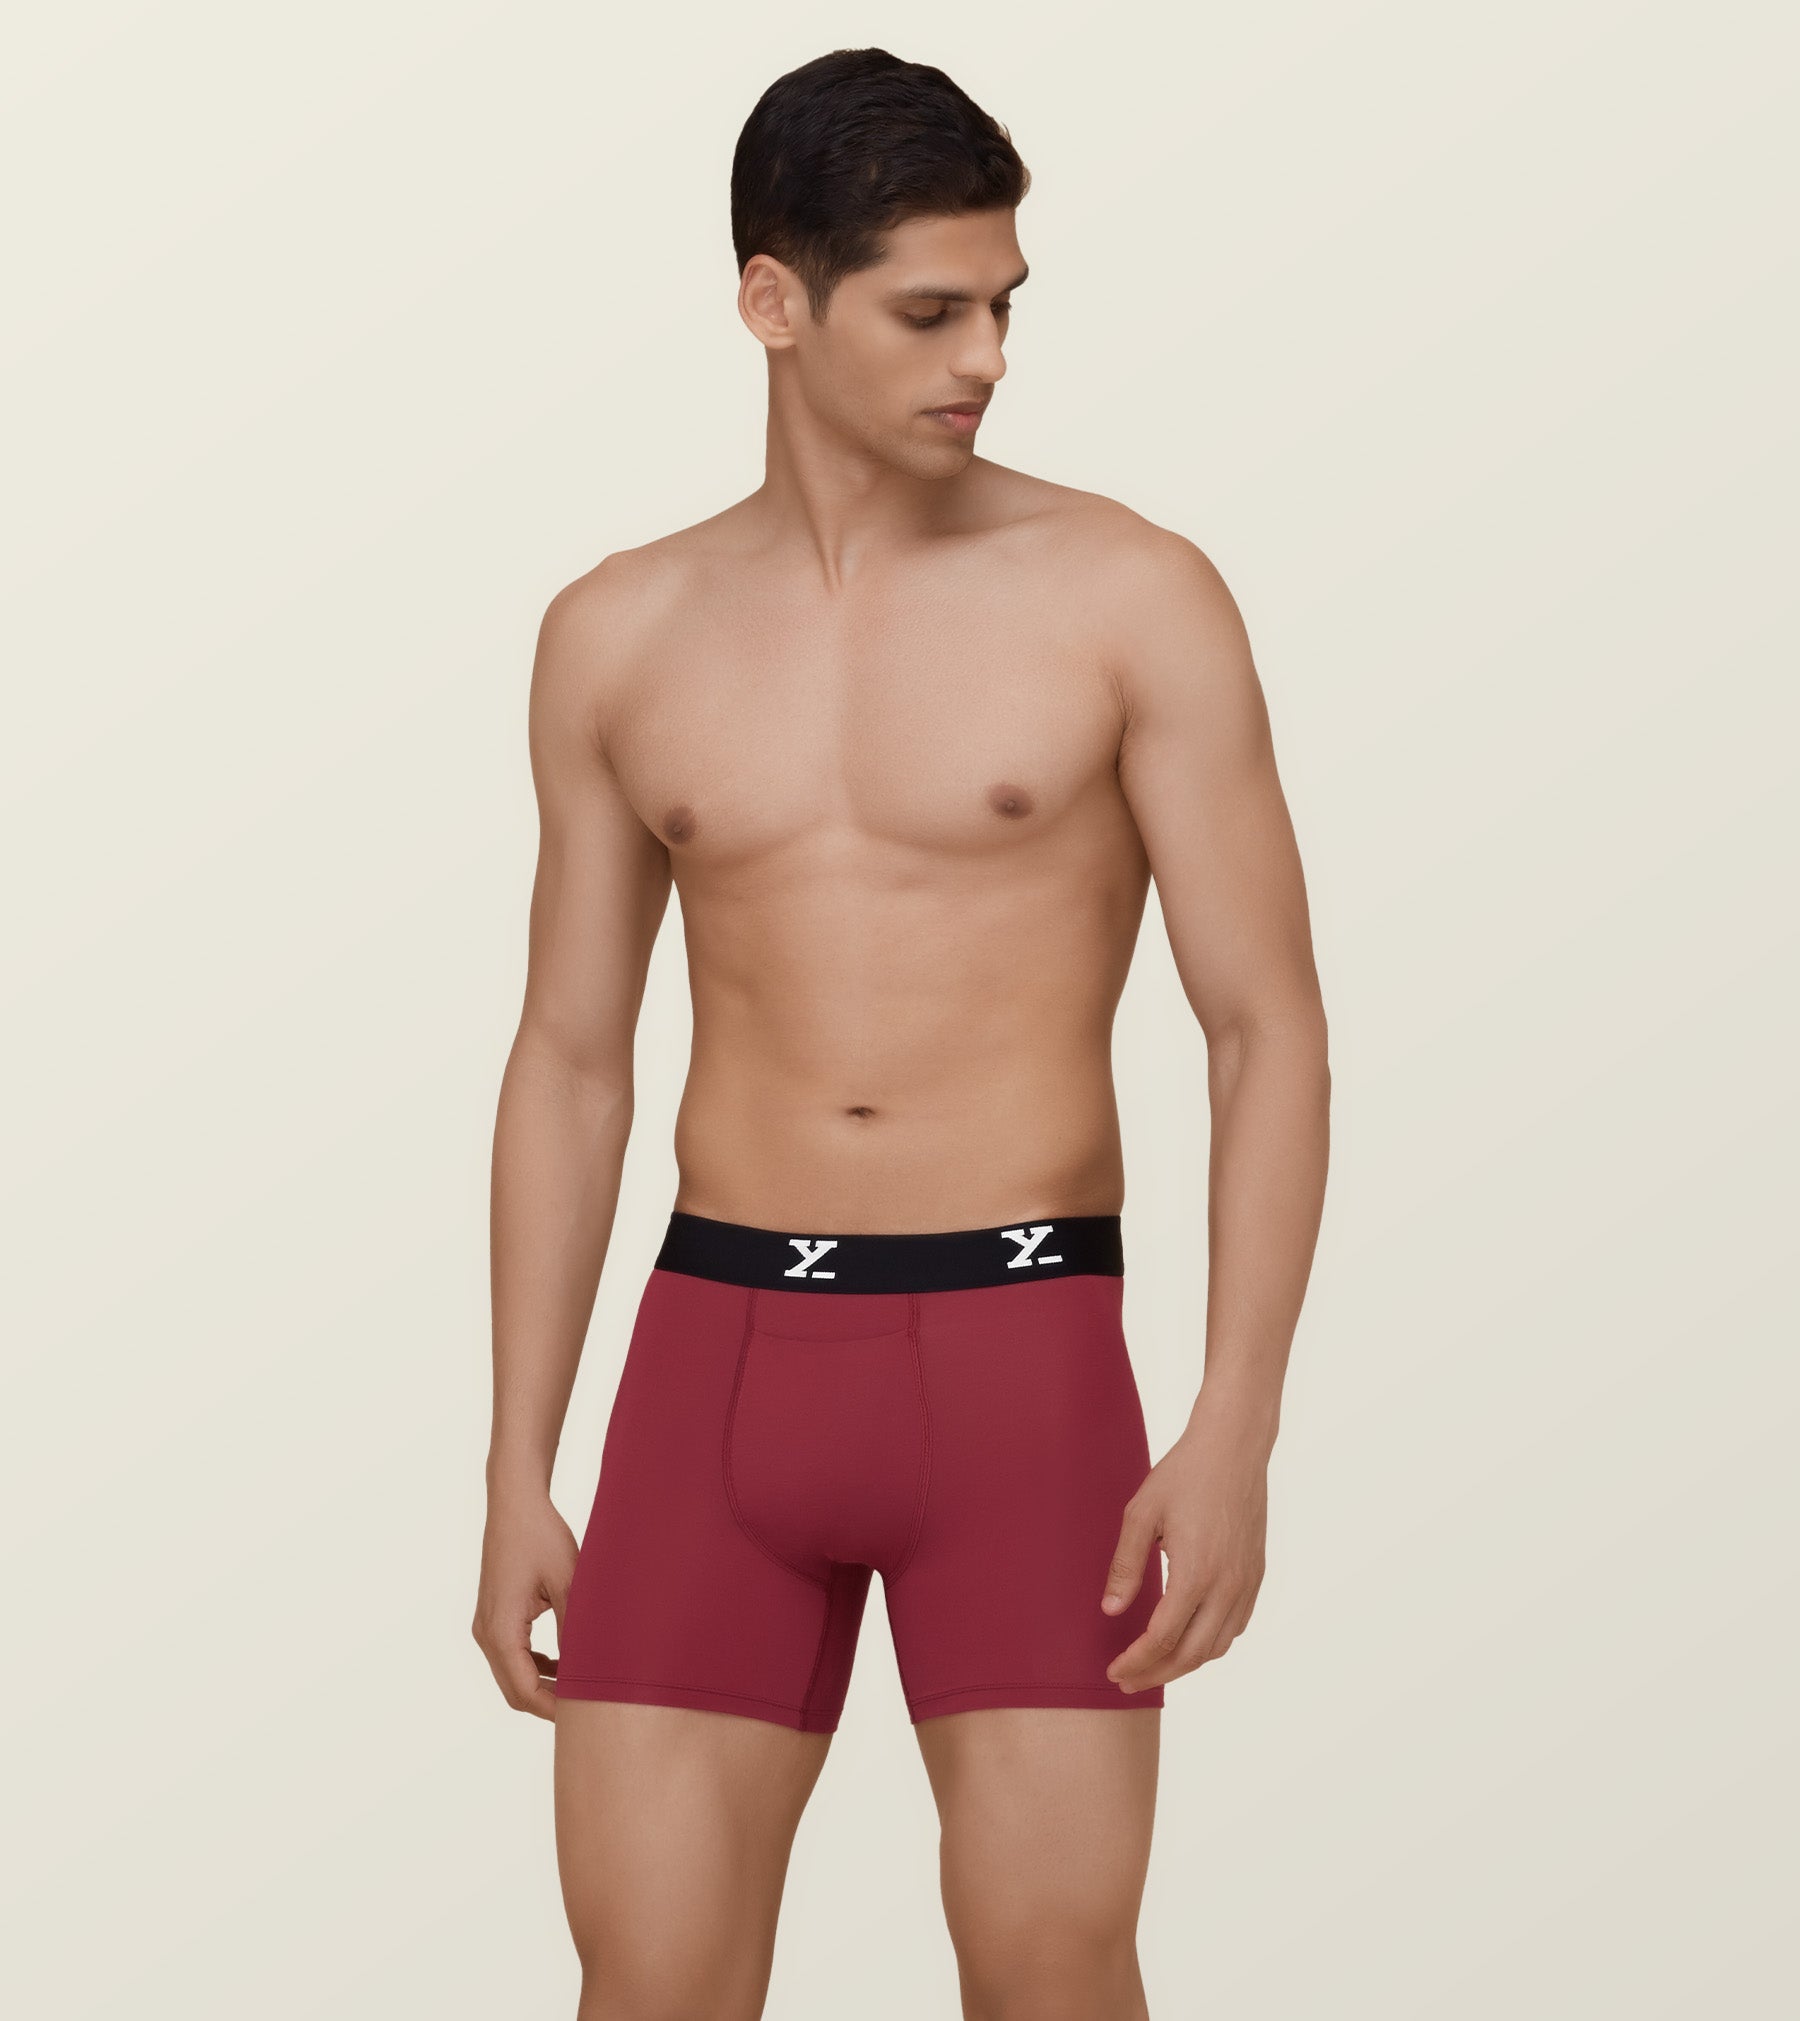 Here Are Some Best Fabrics To Choose From For Men's Underwear